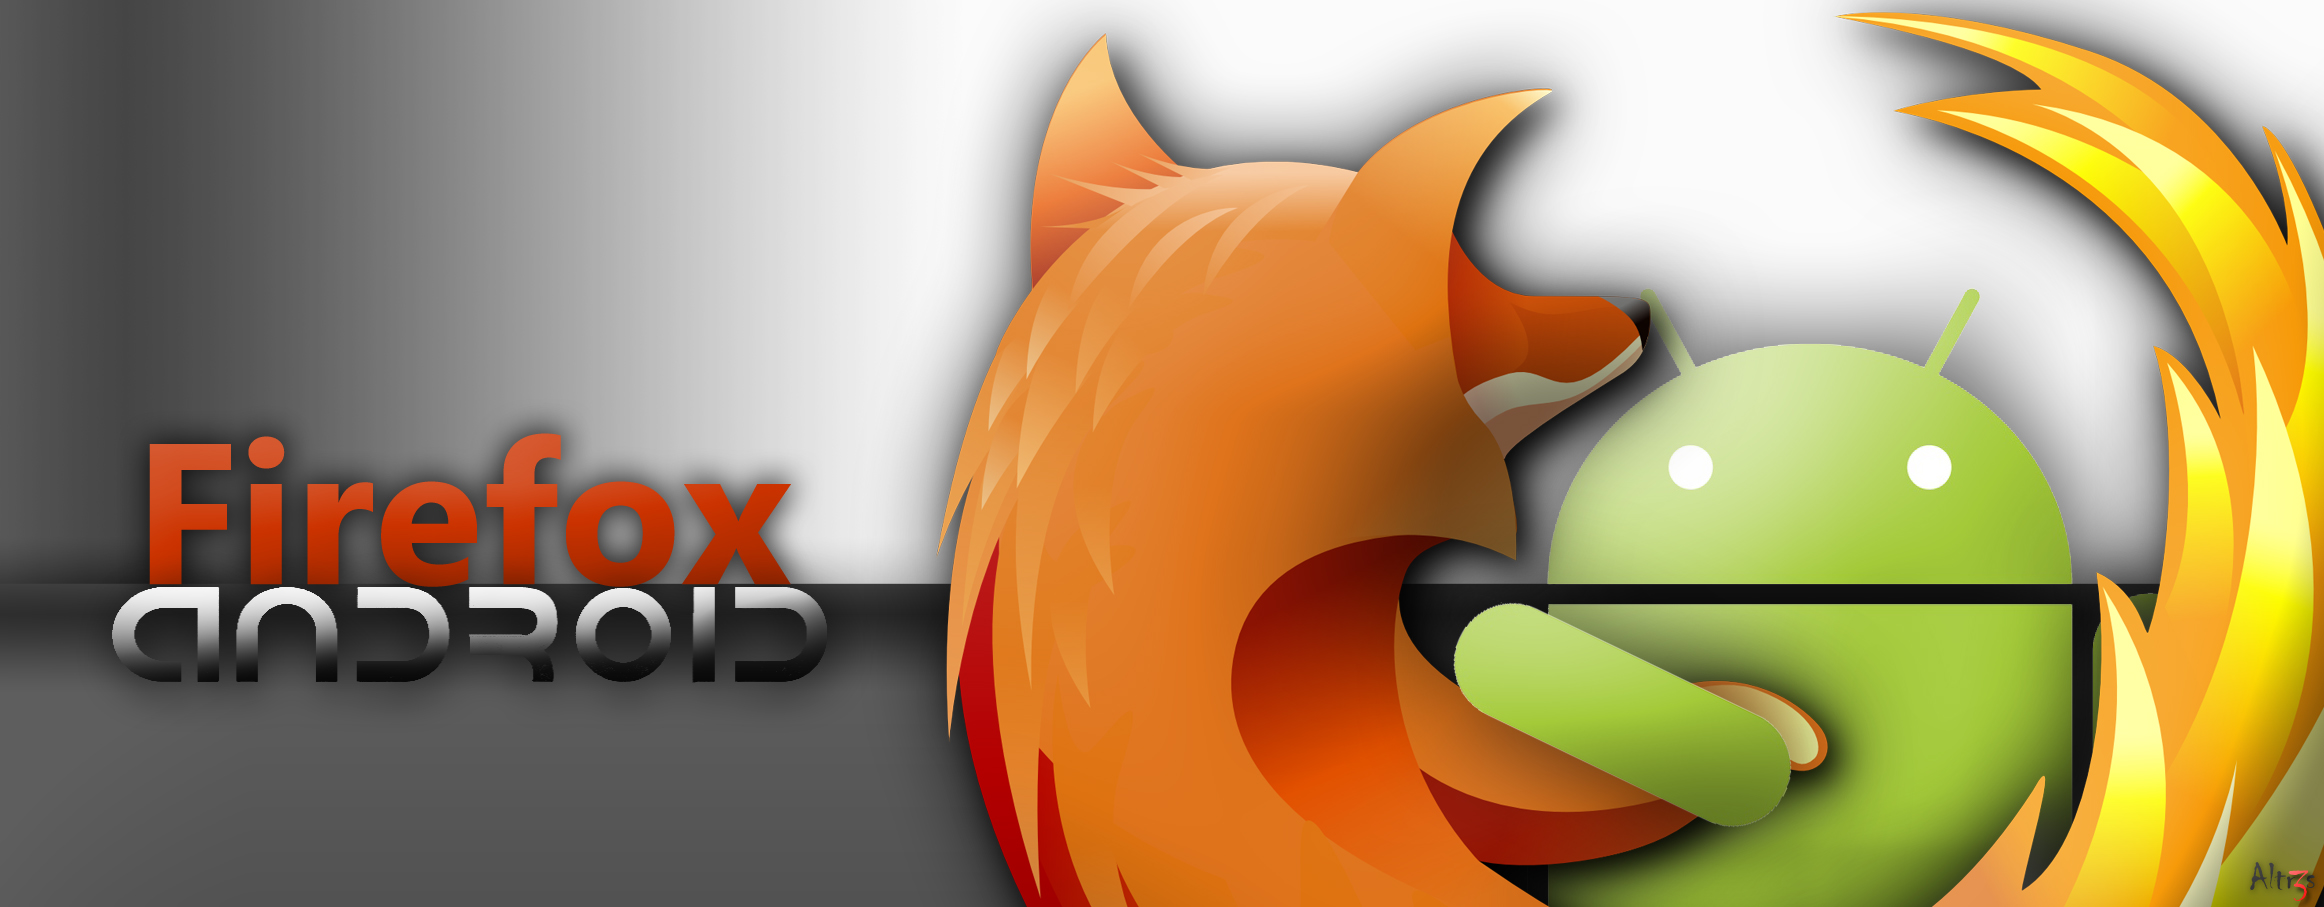 mozilla firefox for android 2.2 free download